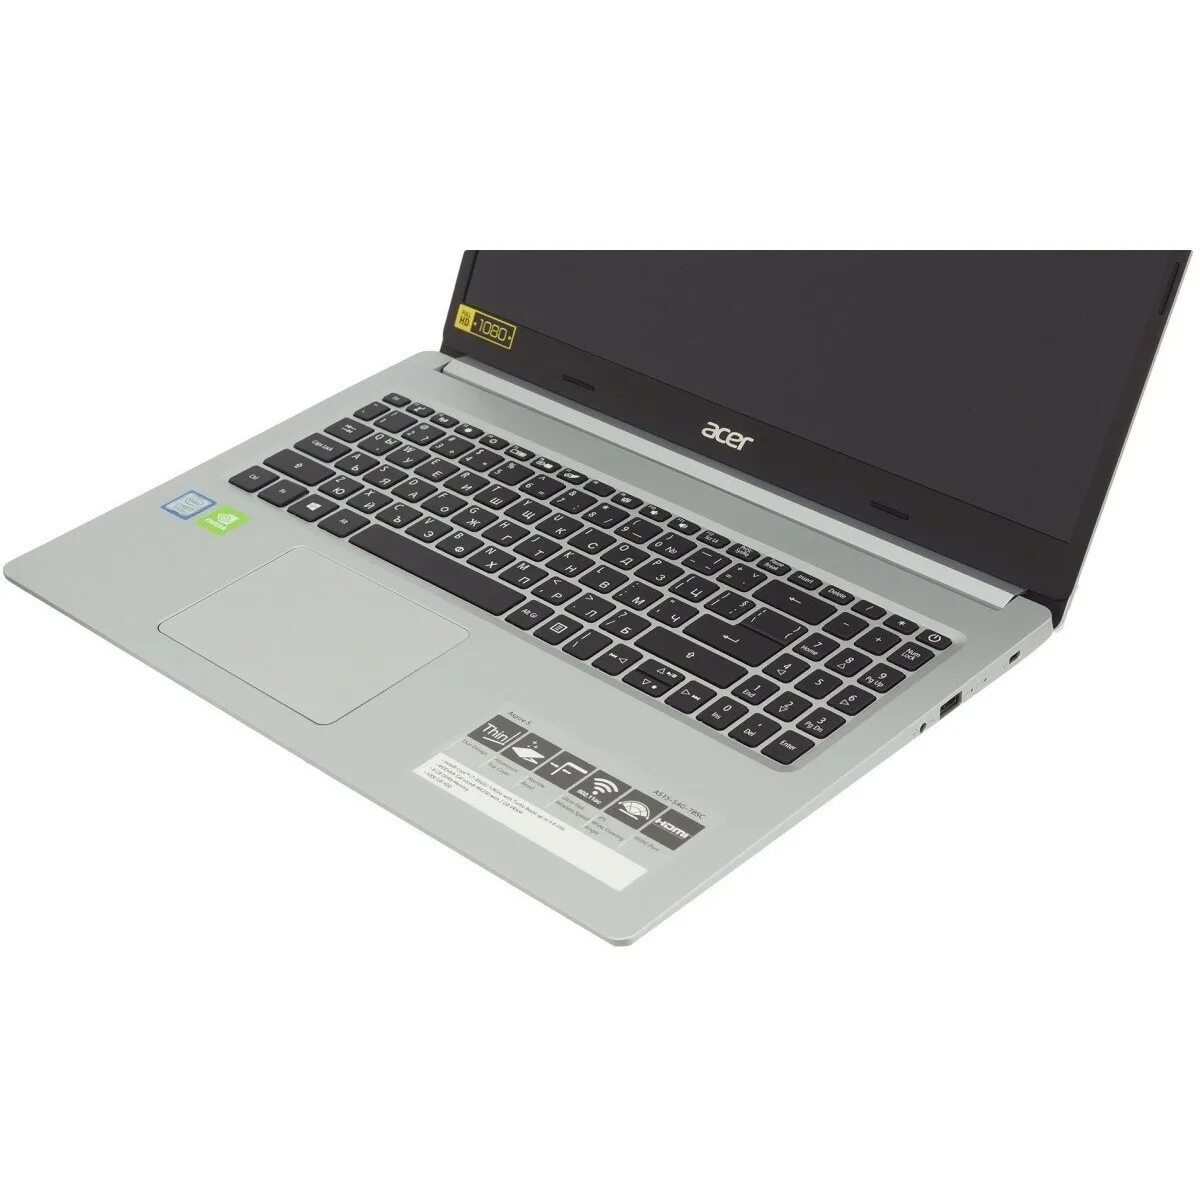 Aspire 5 характеристики. Acer Aspire a515. Acer Aspire 5 a515-54. Ноутбук Acer Aspire a515-55g. Acer a515-55.